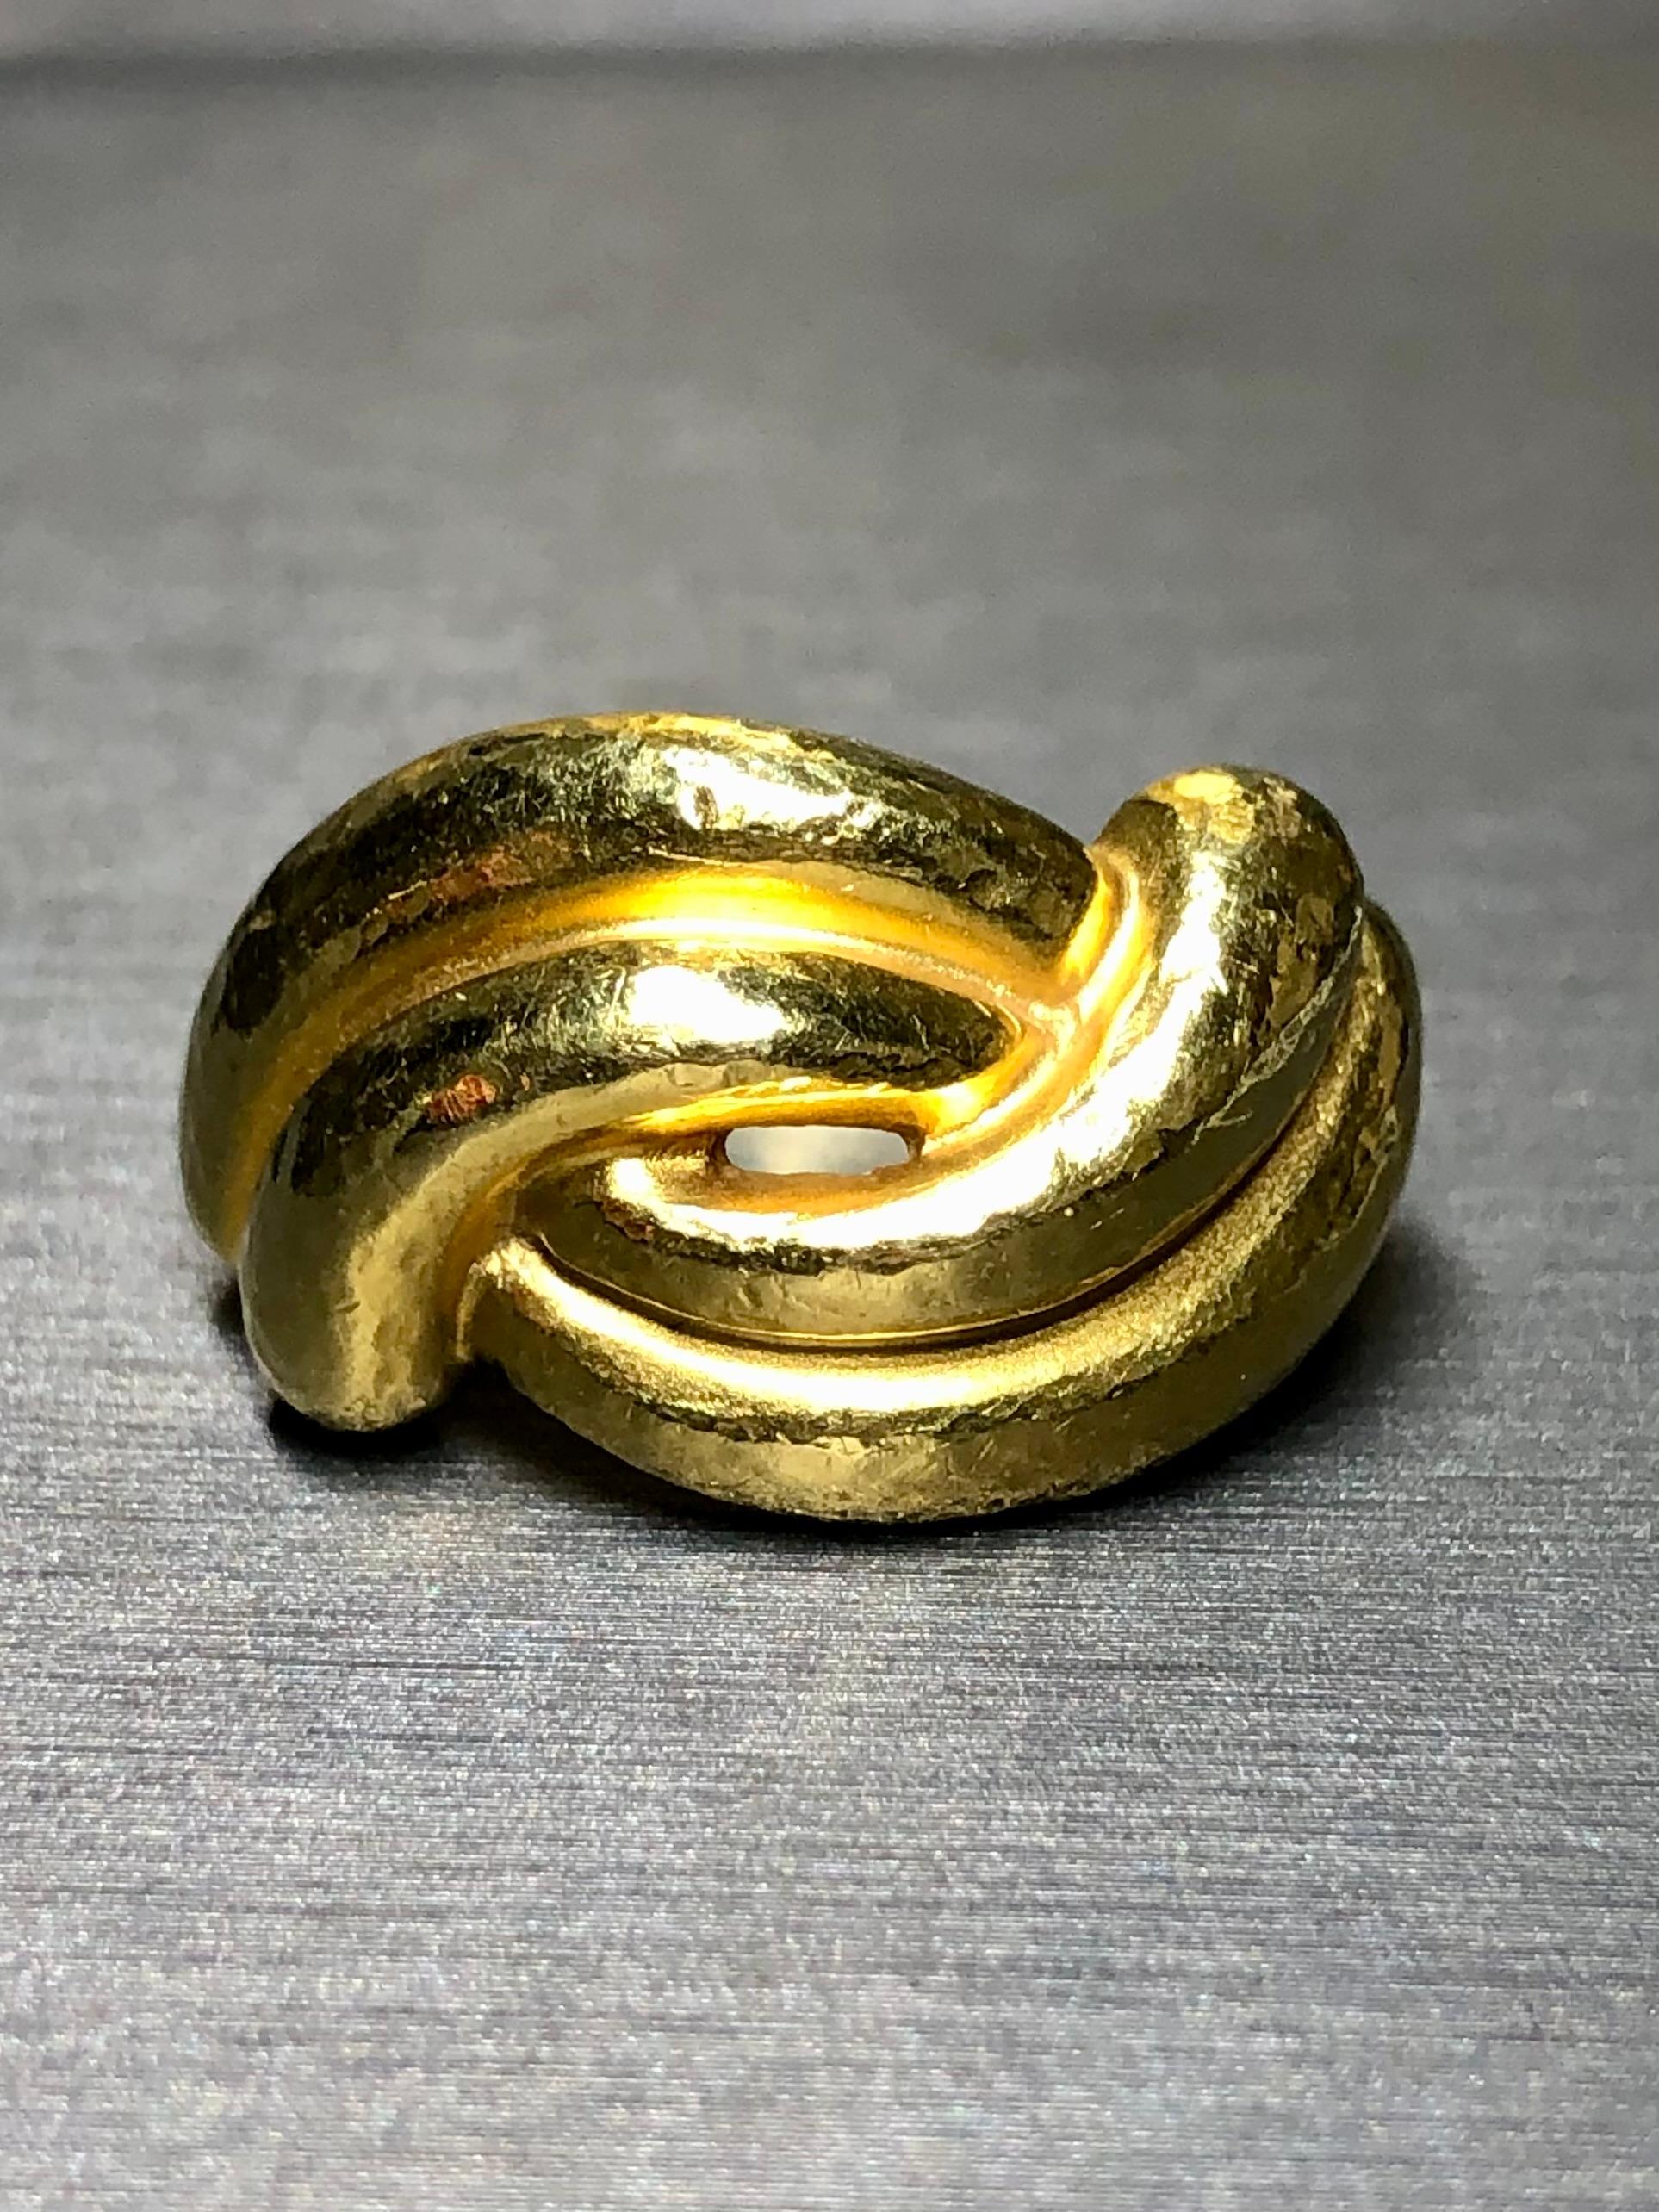 
A simple yet elegant cocktail Ring by famed Greek design house, ZOLOTAS. It is hand wrought in 22K yellow gold and finished with a hammered texture. A beautiful and bold design sure to stand the test of time.


Dimensions/Weight:

Ring measures